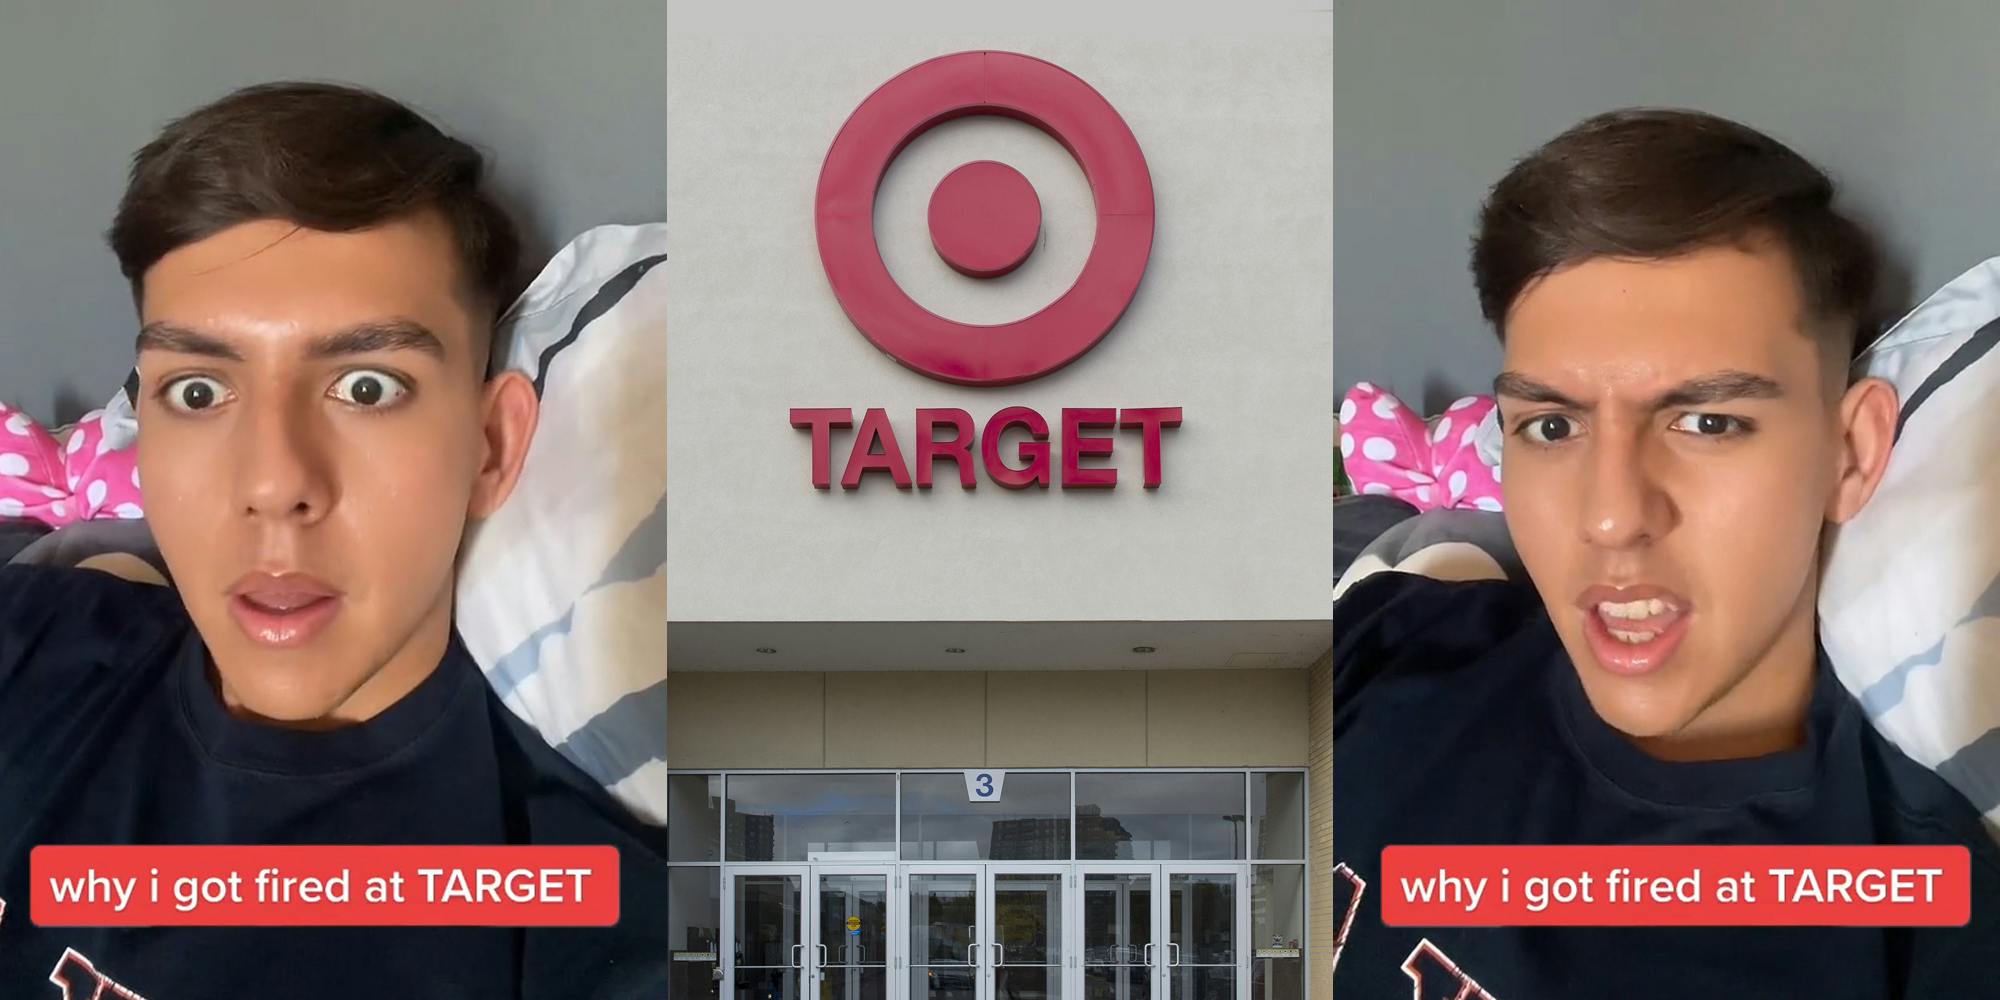 man speaking caption "why i got fired at TARGET" (l) Target store with sign (c) man speaking caption "why i got fired at TARGET" (r)